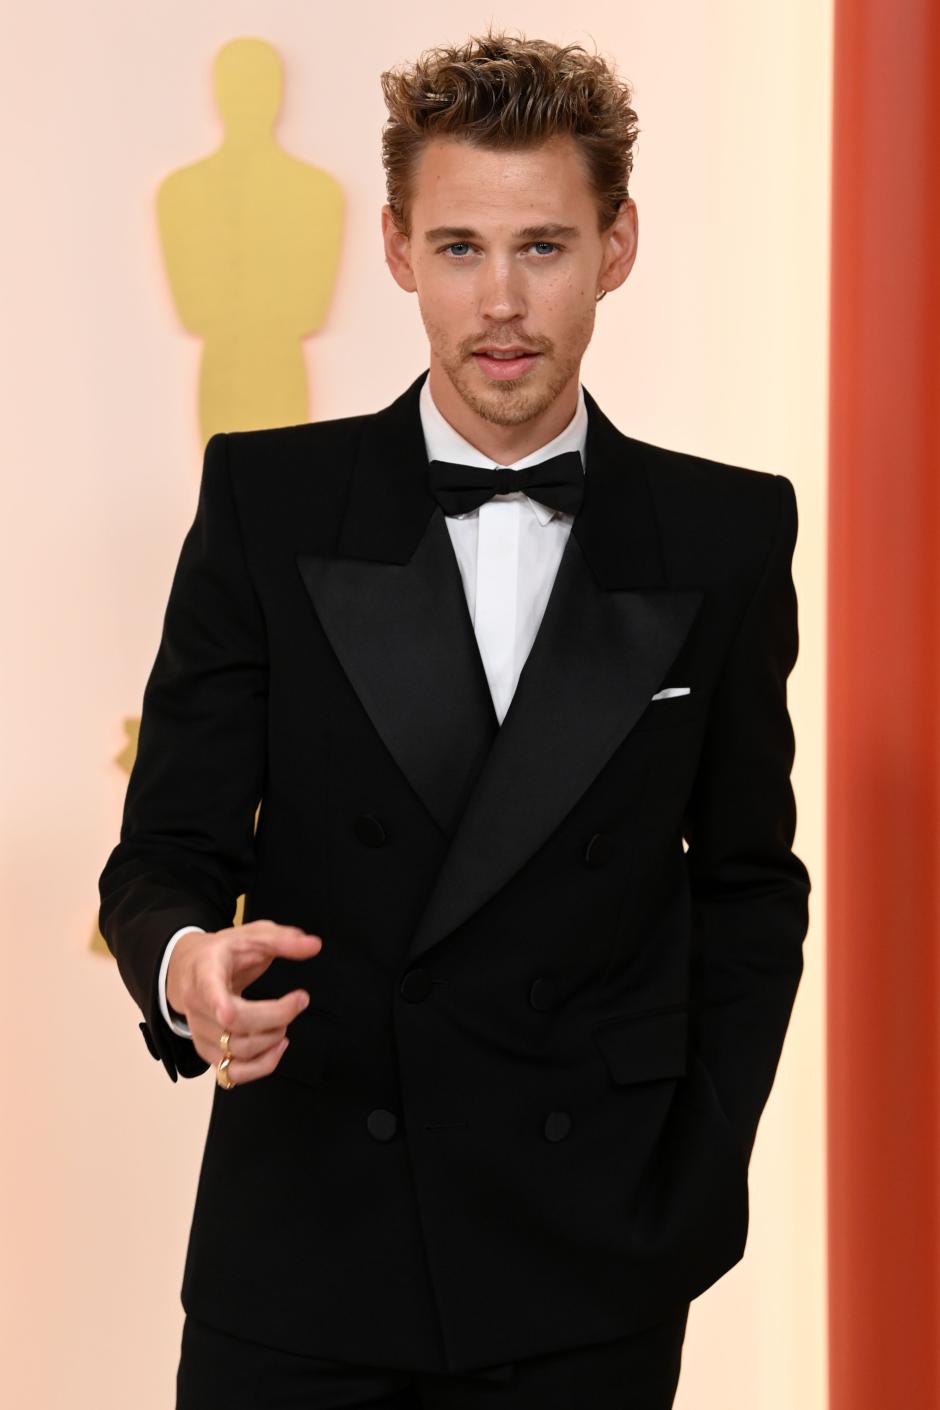 Mandatory Credit: Photo by David Fisher/Shutterstock (13804191ka)
Austin Butler
95th Annual Academy Awards, Arrivals, Los Angeles, California, USA - 12 Mar 2023 *** Local Caption *** .